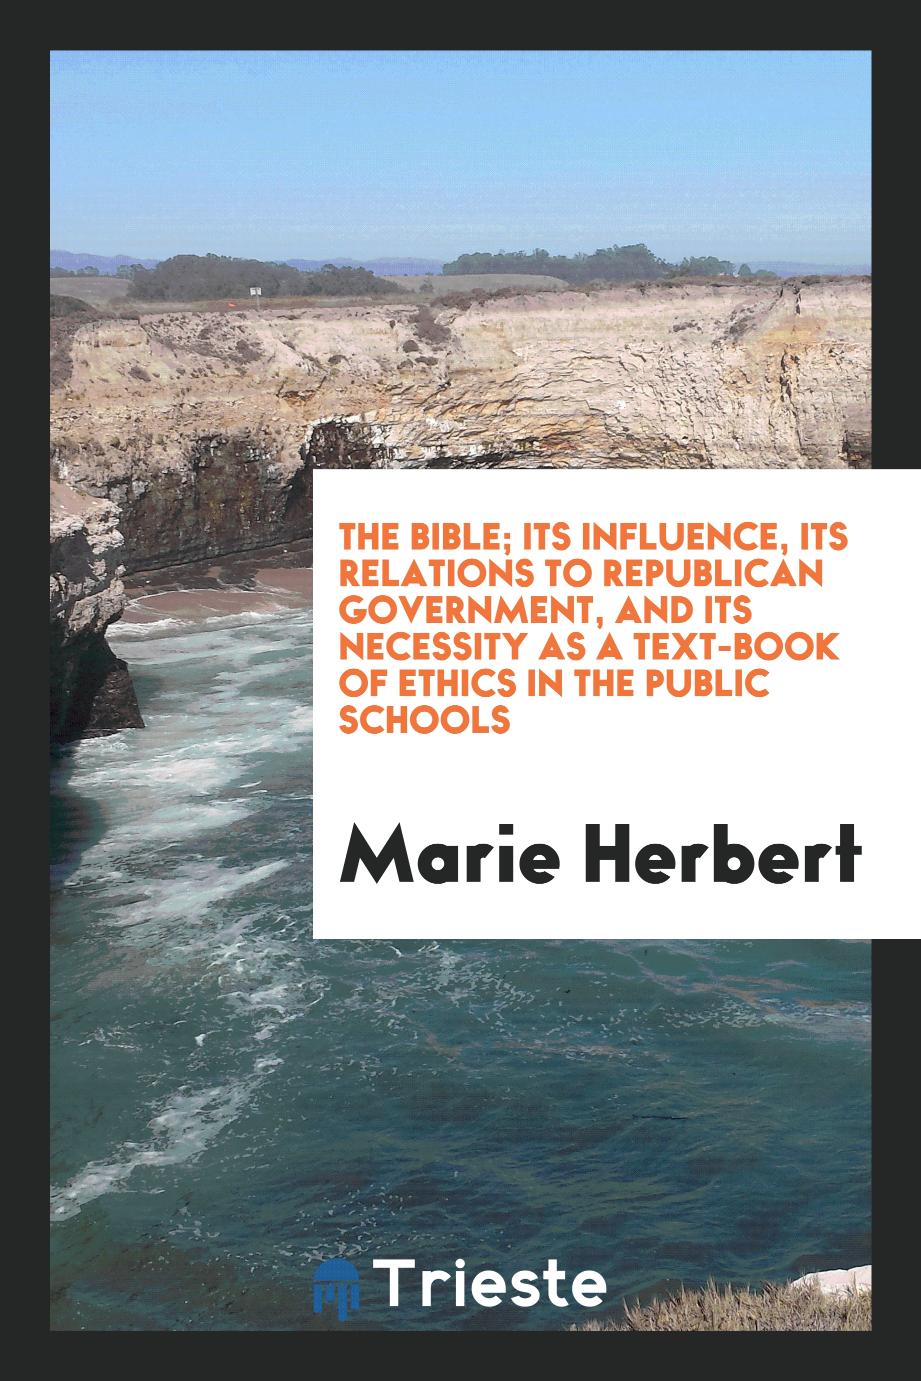 The Bible; Its influence, Its Relations to Republican Government, and Its necessity as a text-book of ethics in the public schools